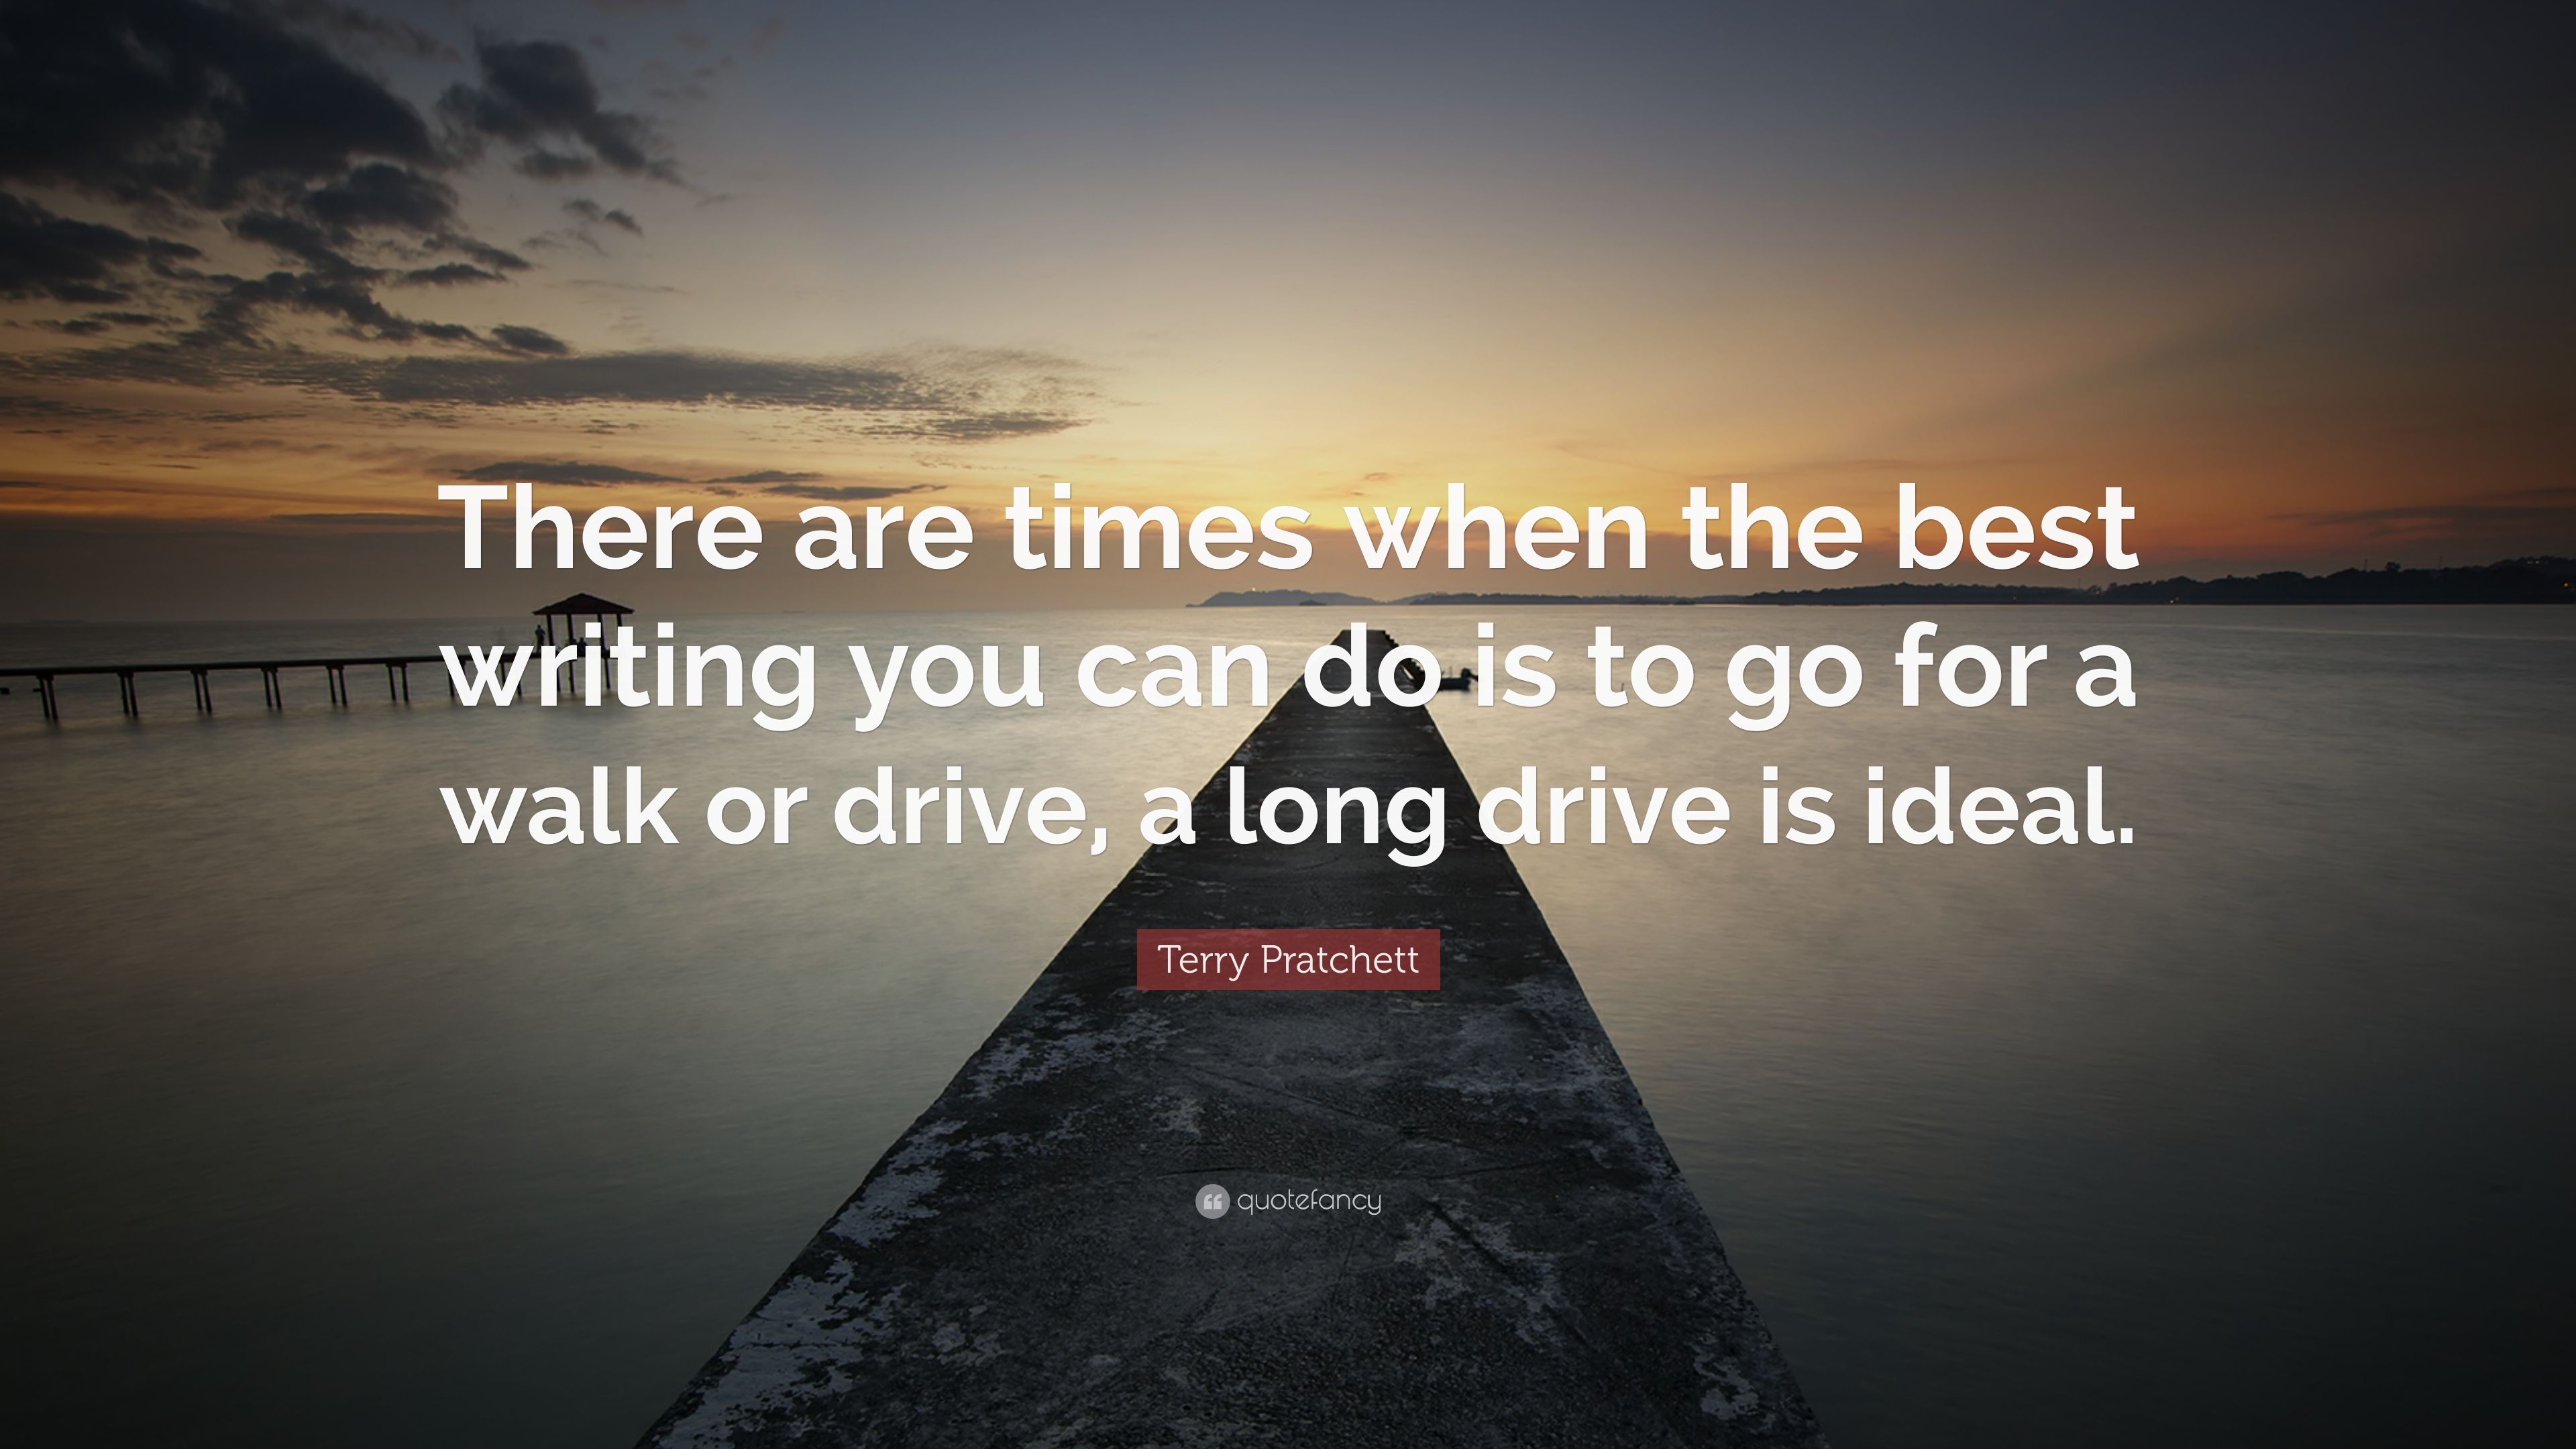 Terry Pratchett Quote: "There are times when the best writing you.